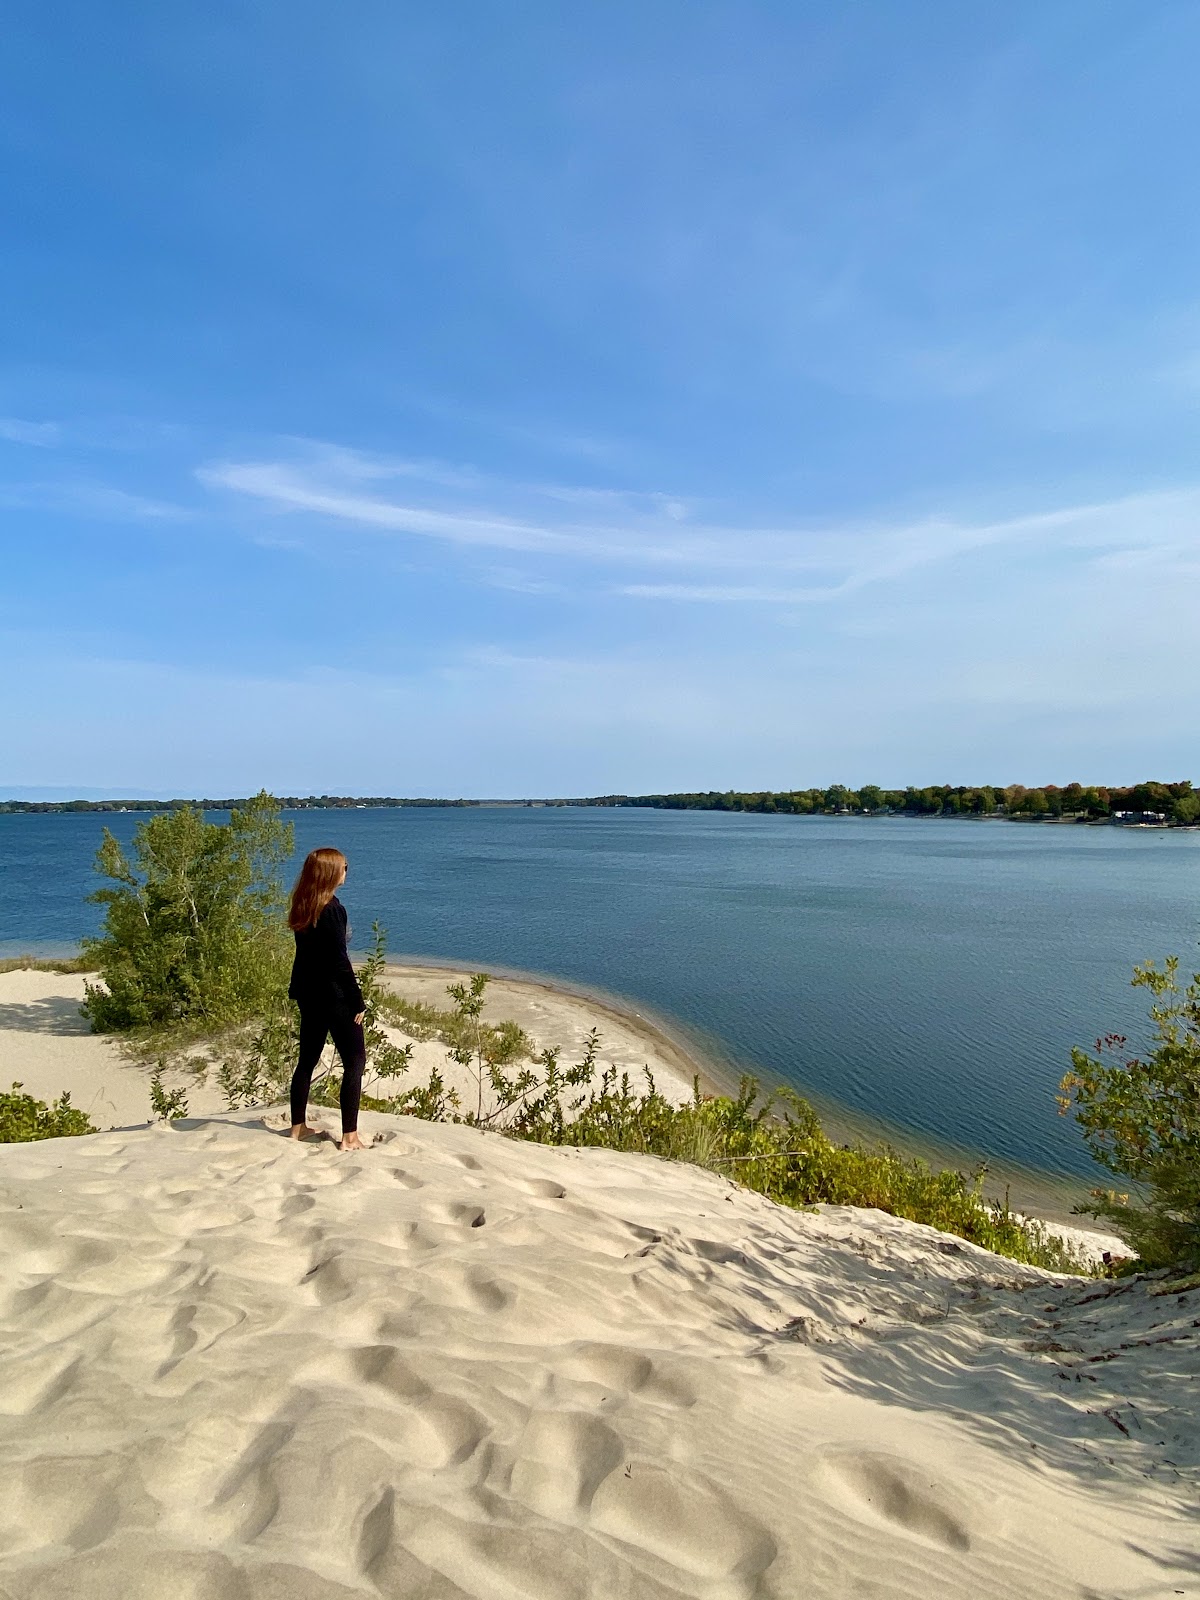 Instagrammable prince edward county